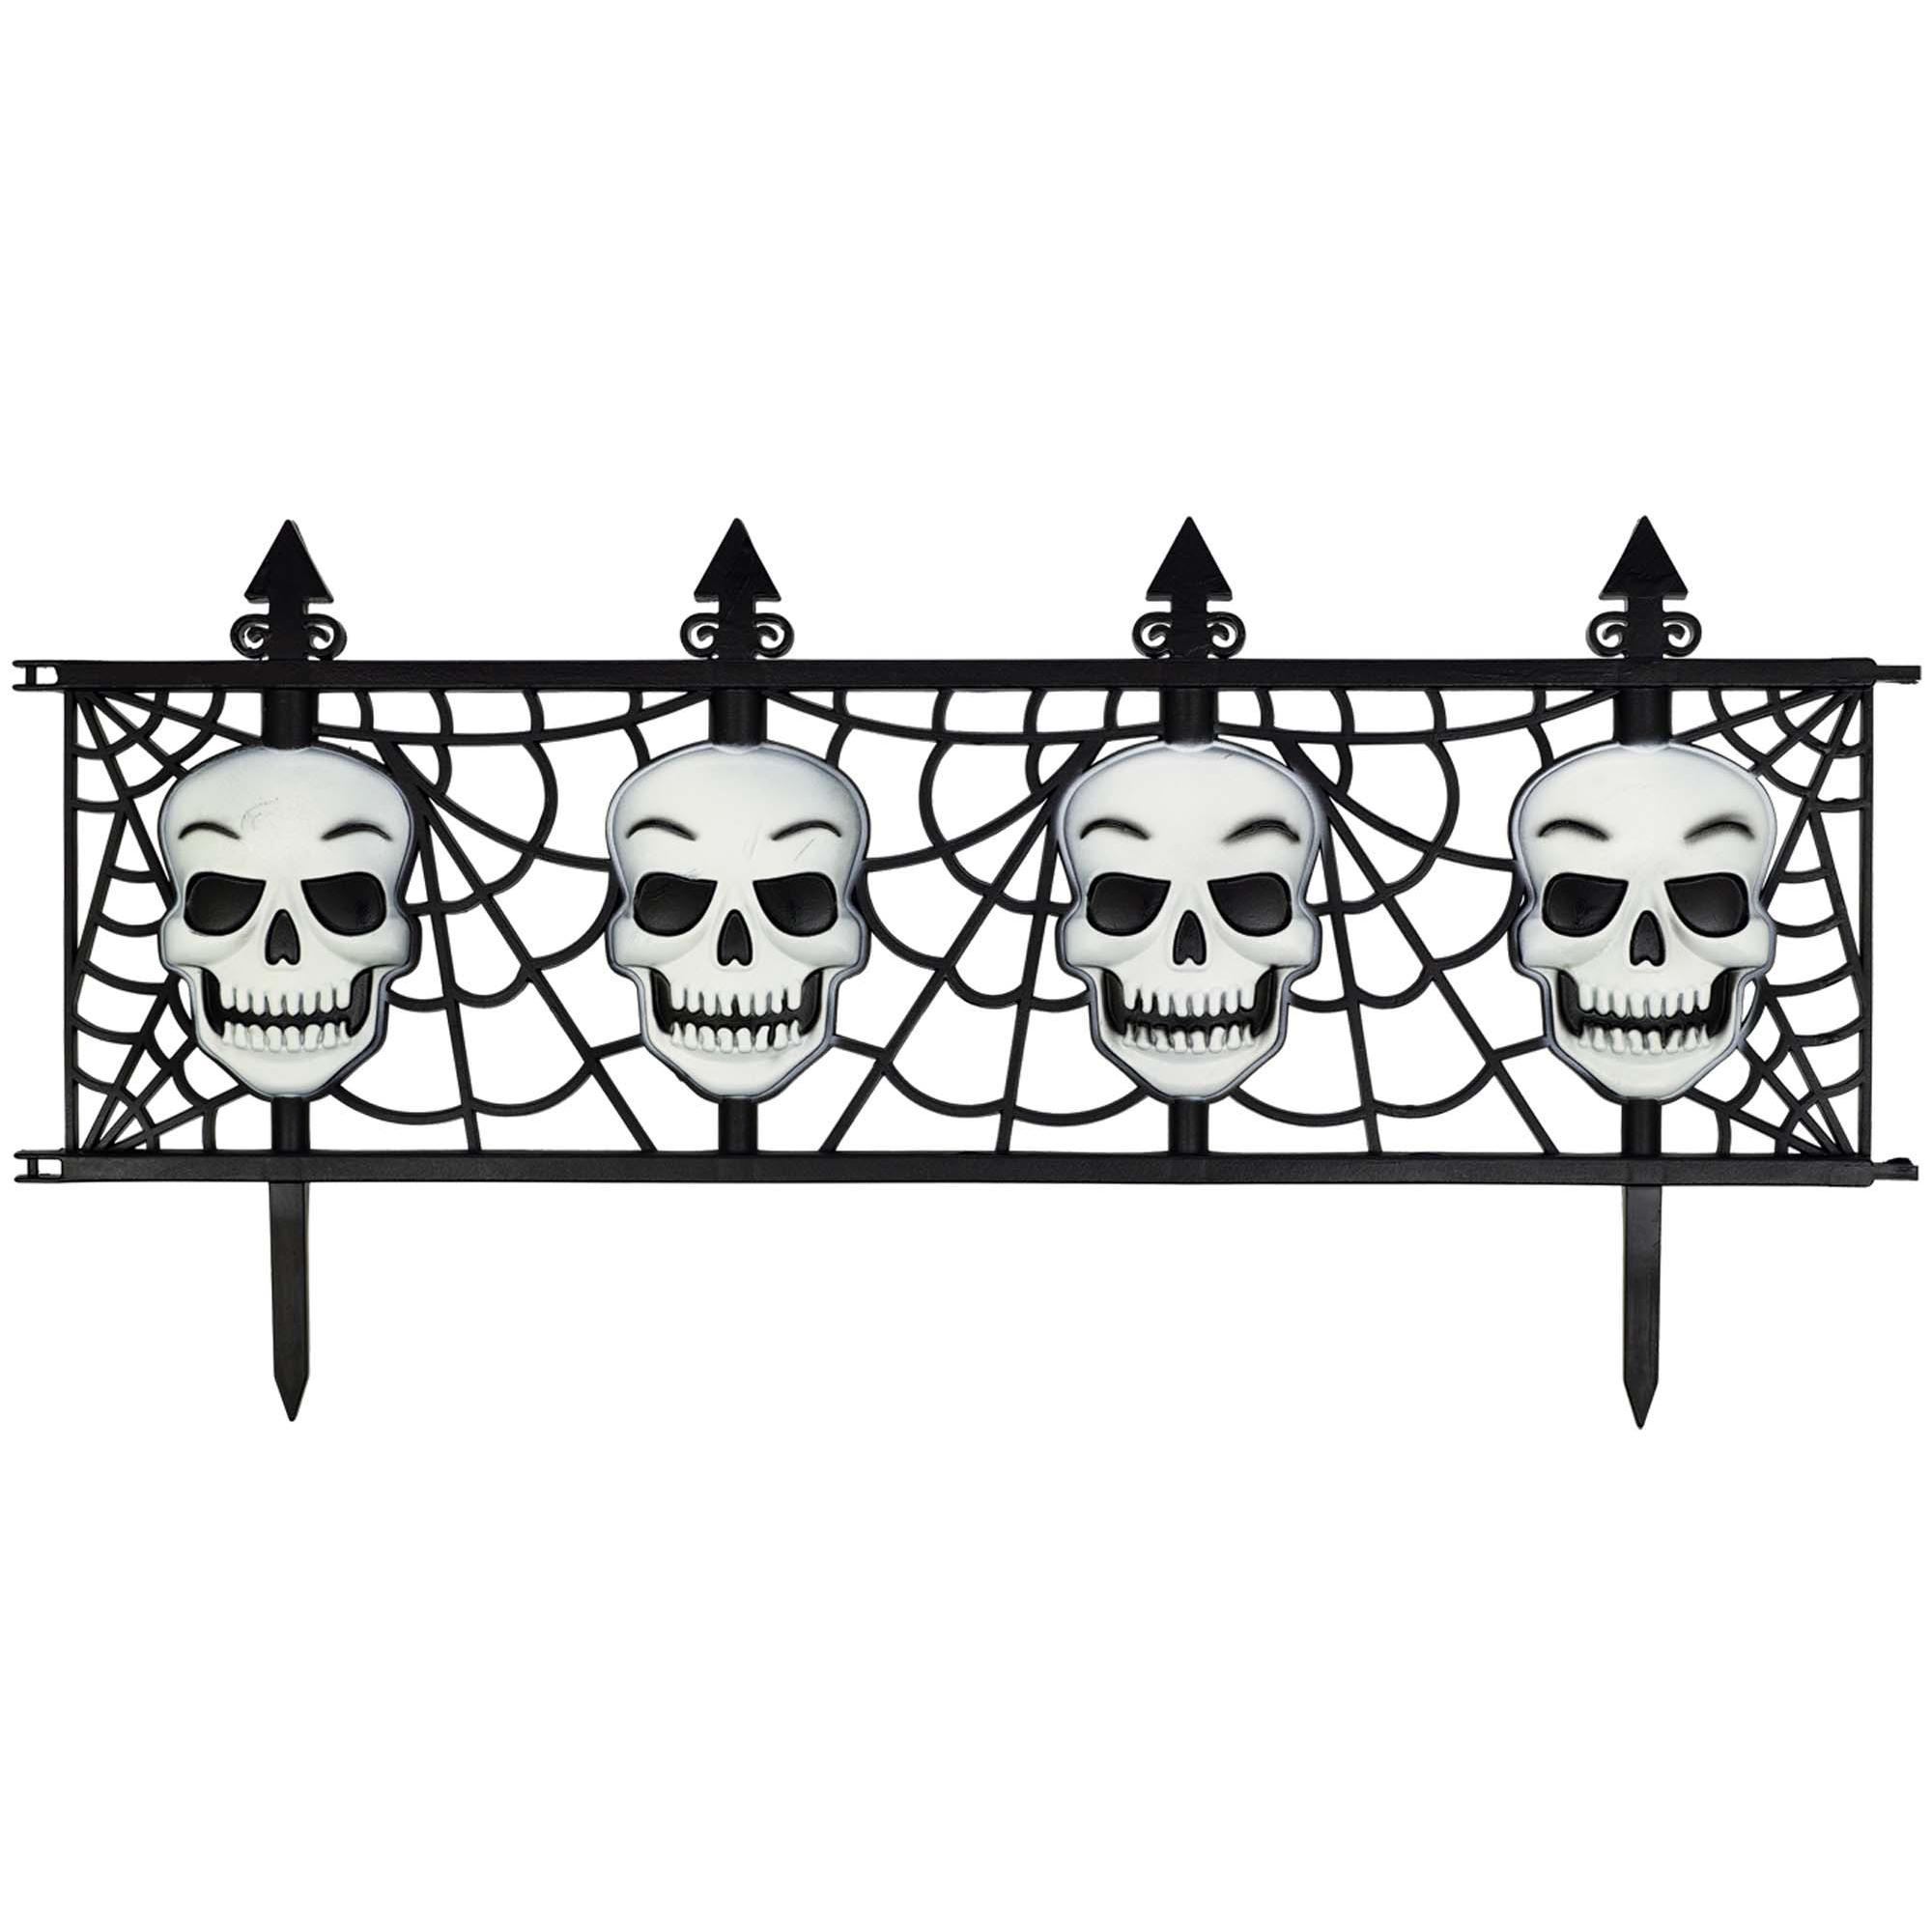 Skull Fence Decorations - Party Centre